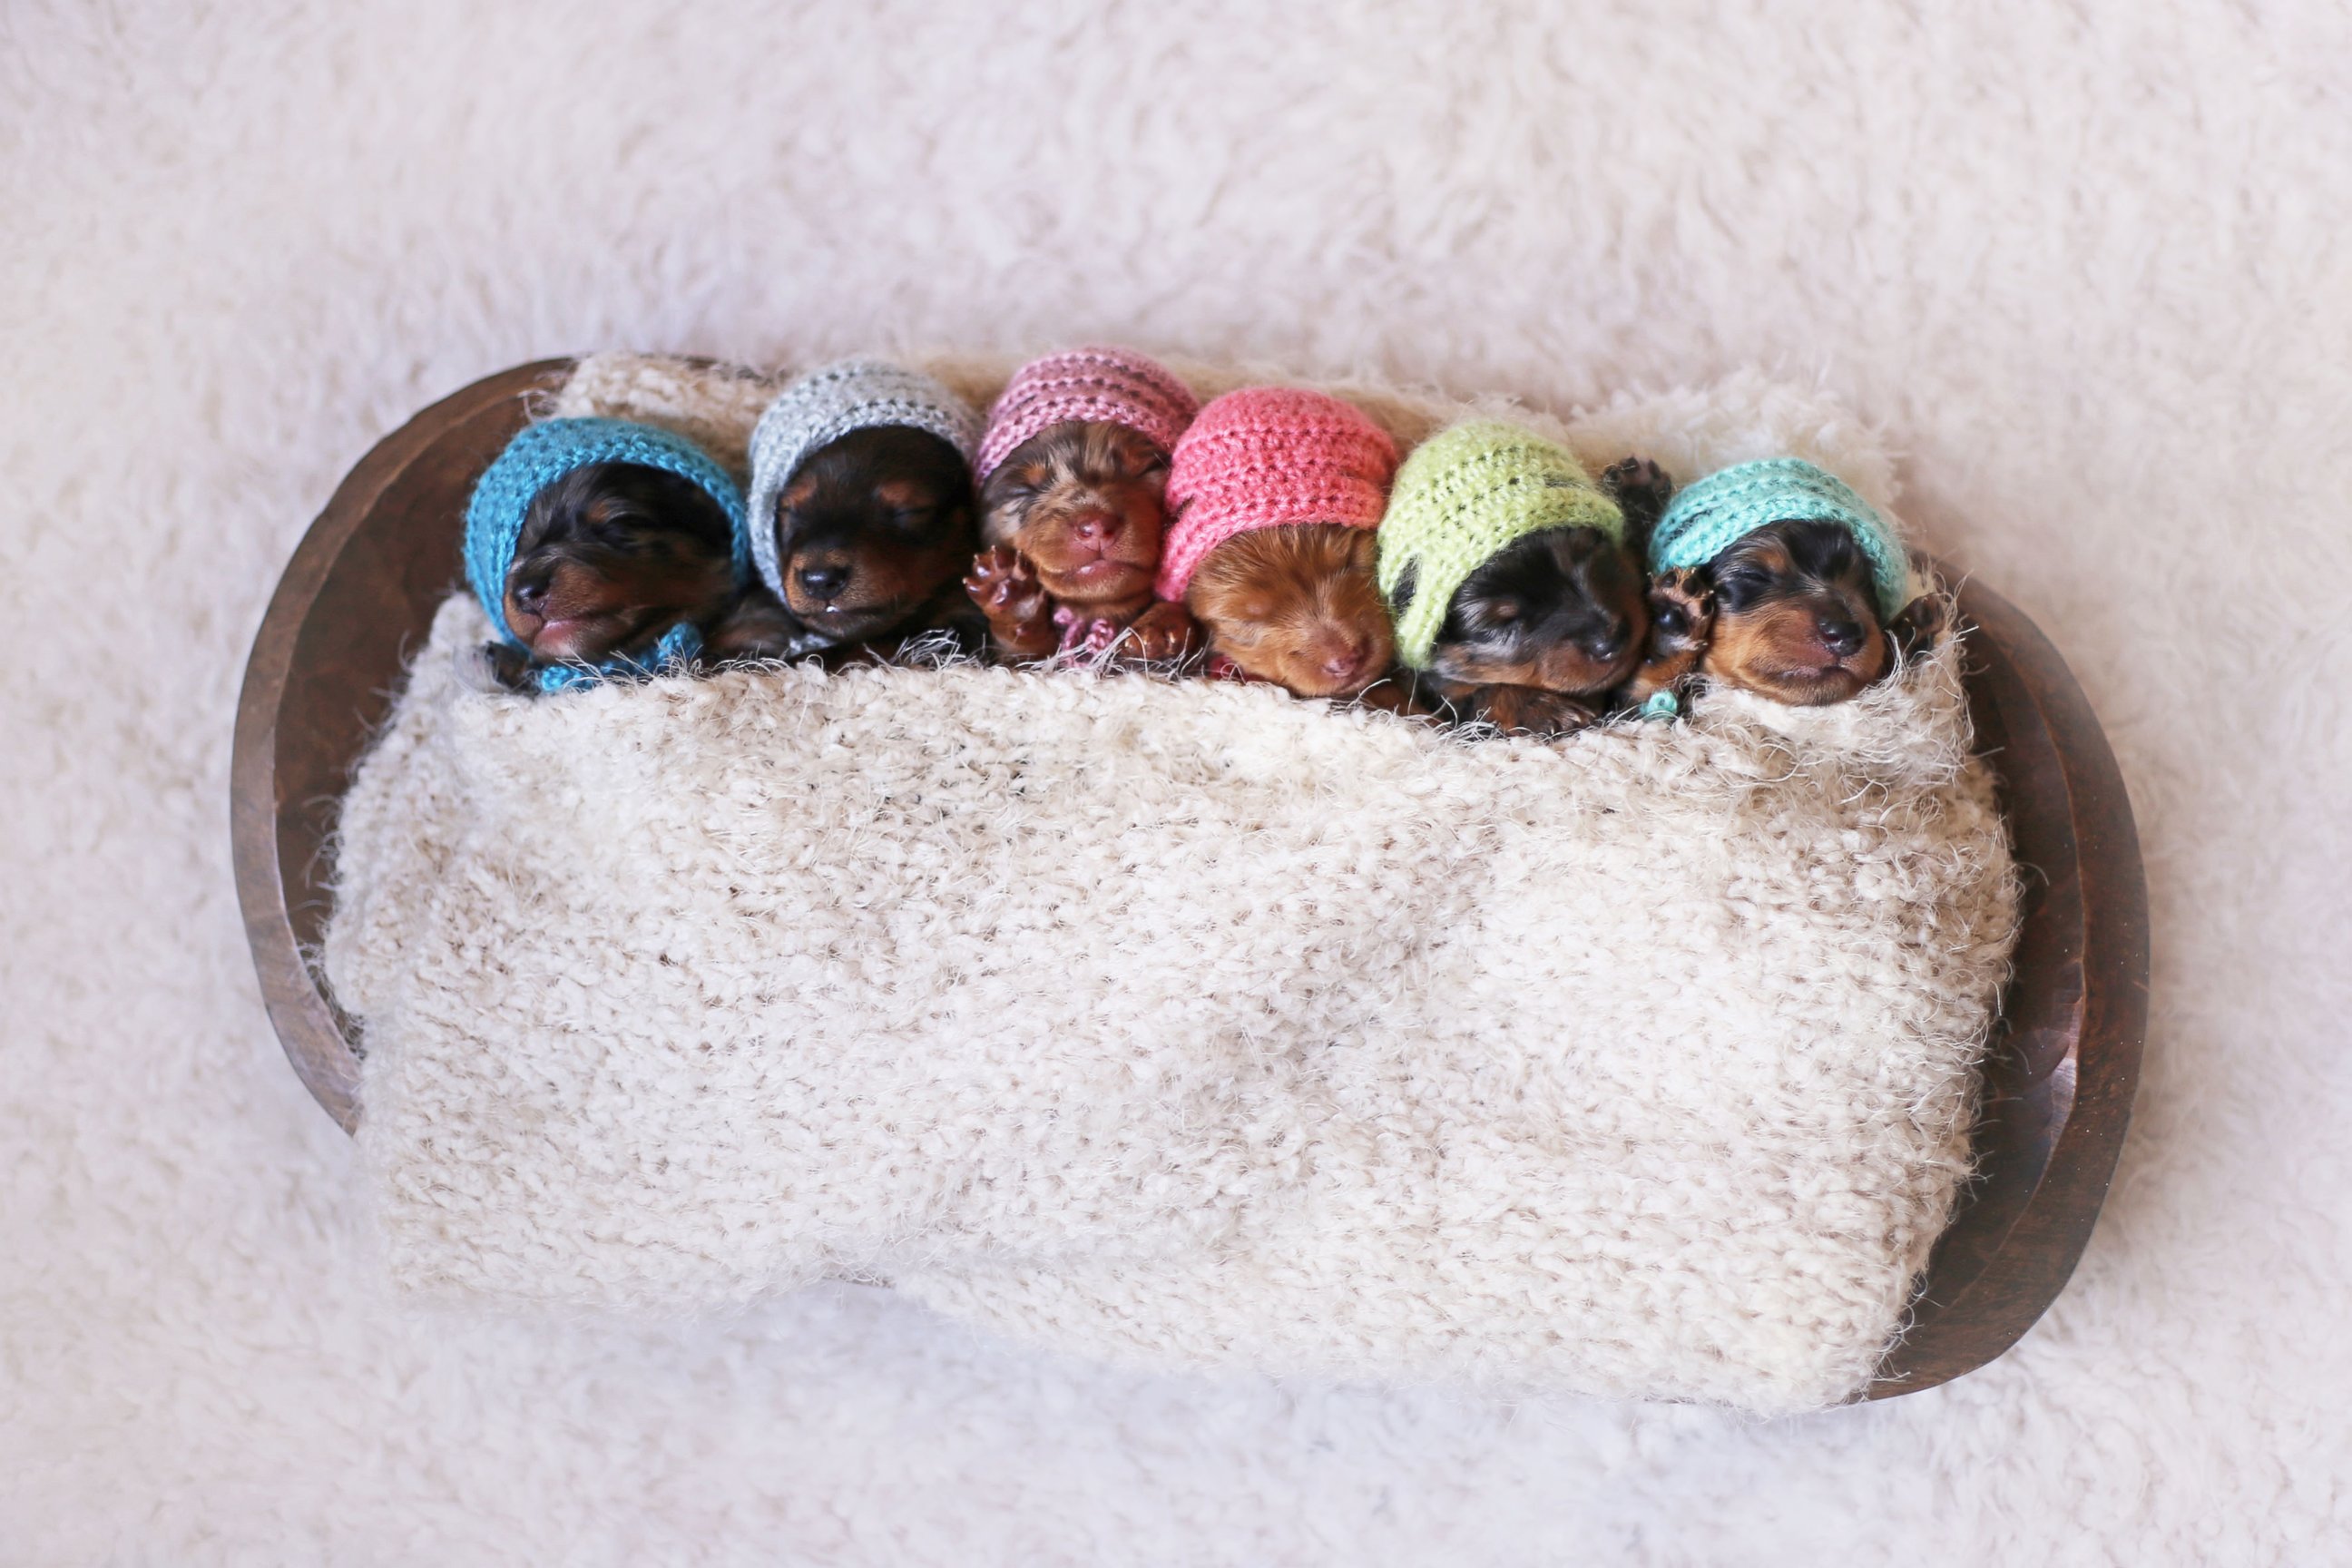 PHOTO: A newborn photographer has swapped babies for puppies for a unique photo shoot. Belinda Joy Schenk photographed Dachshund parents and their 6 puppies.  